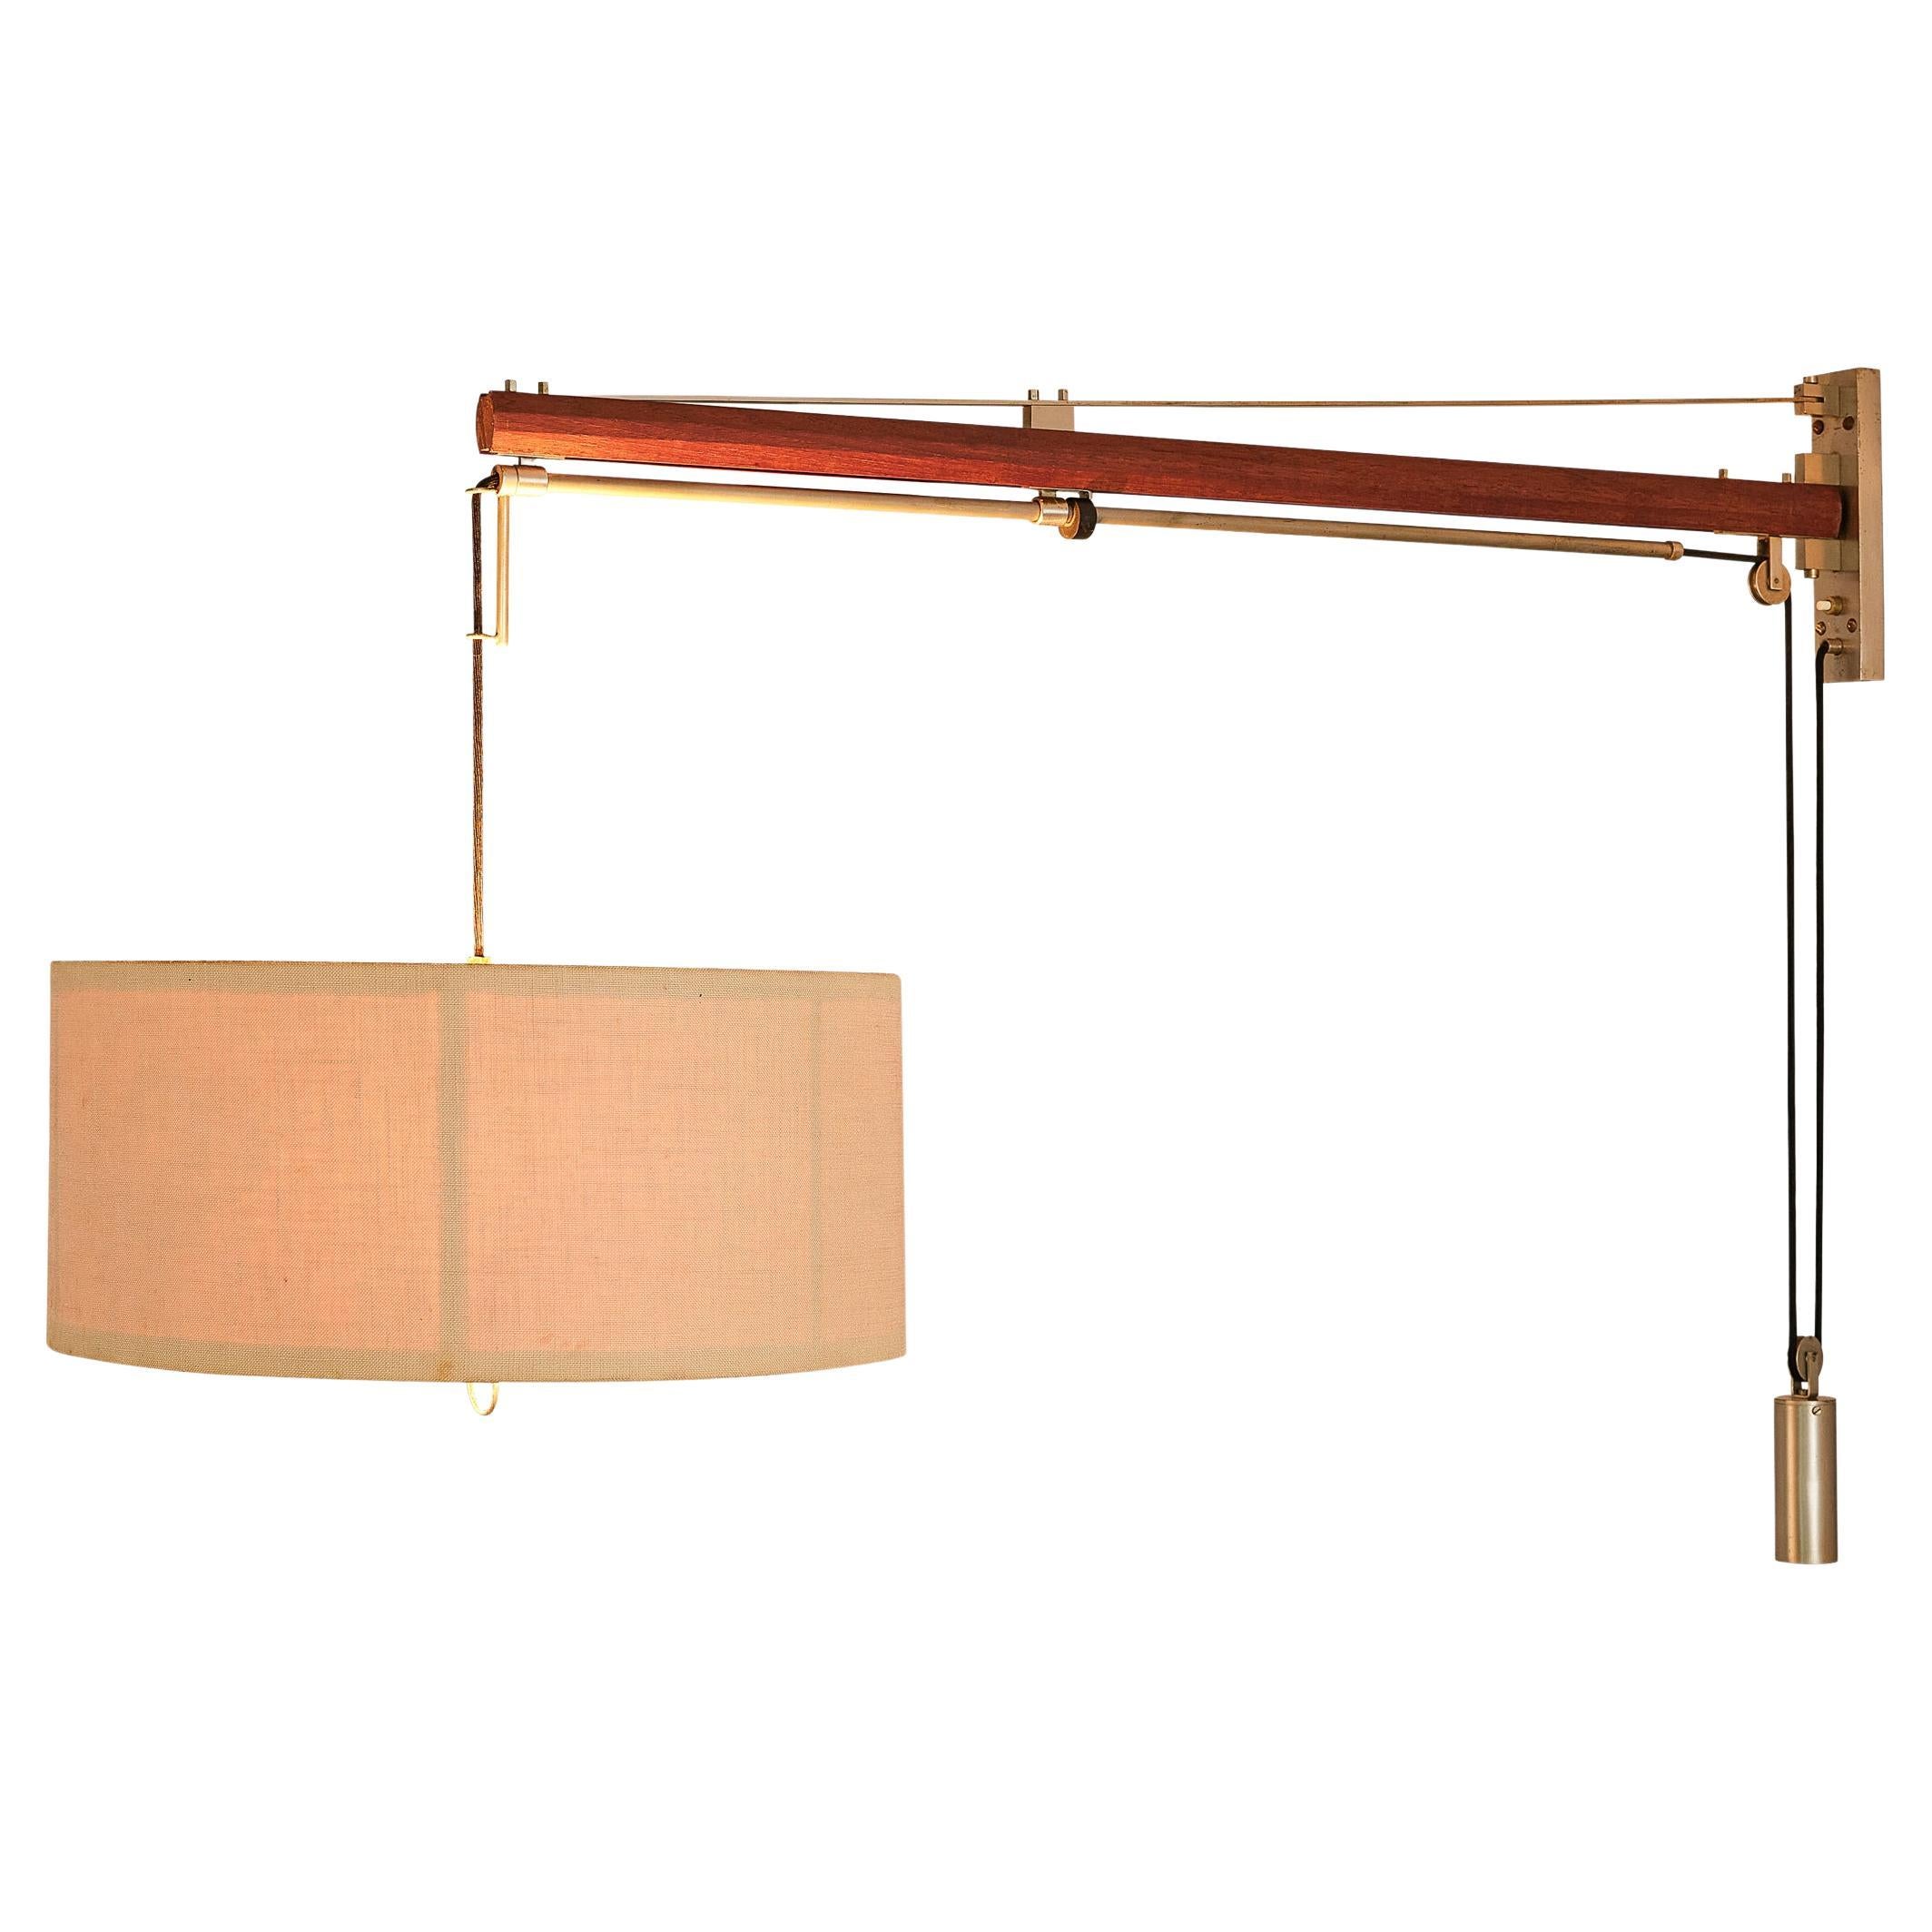 Tito Agnoli for O-luce Wall Light in Teak and Brass